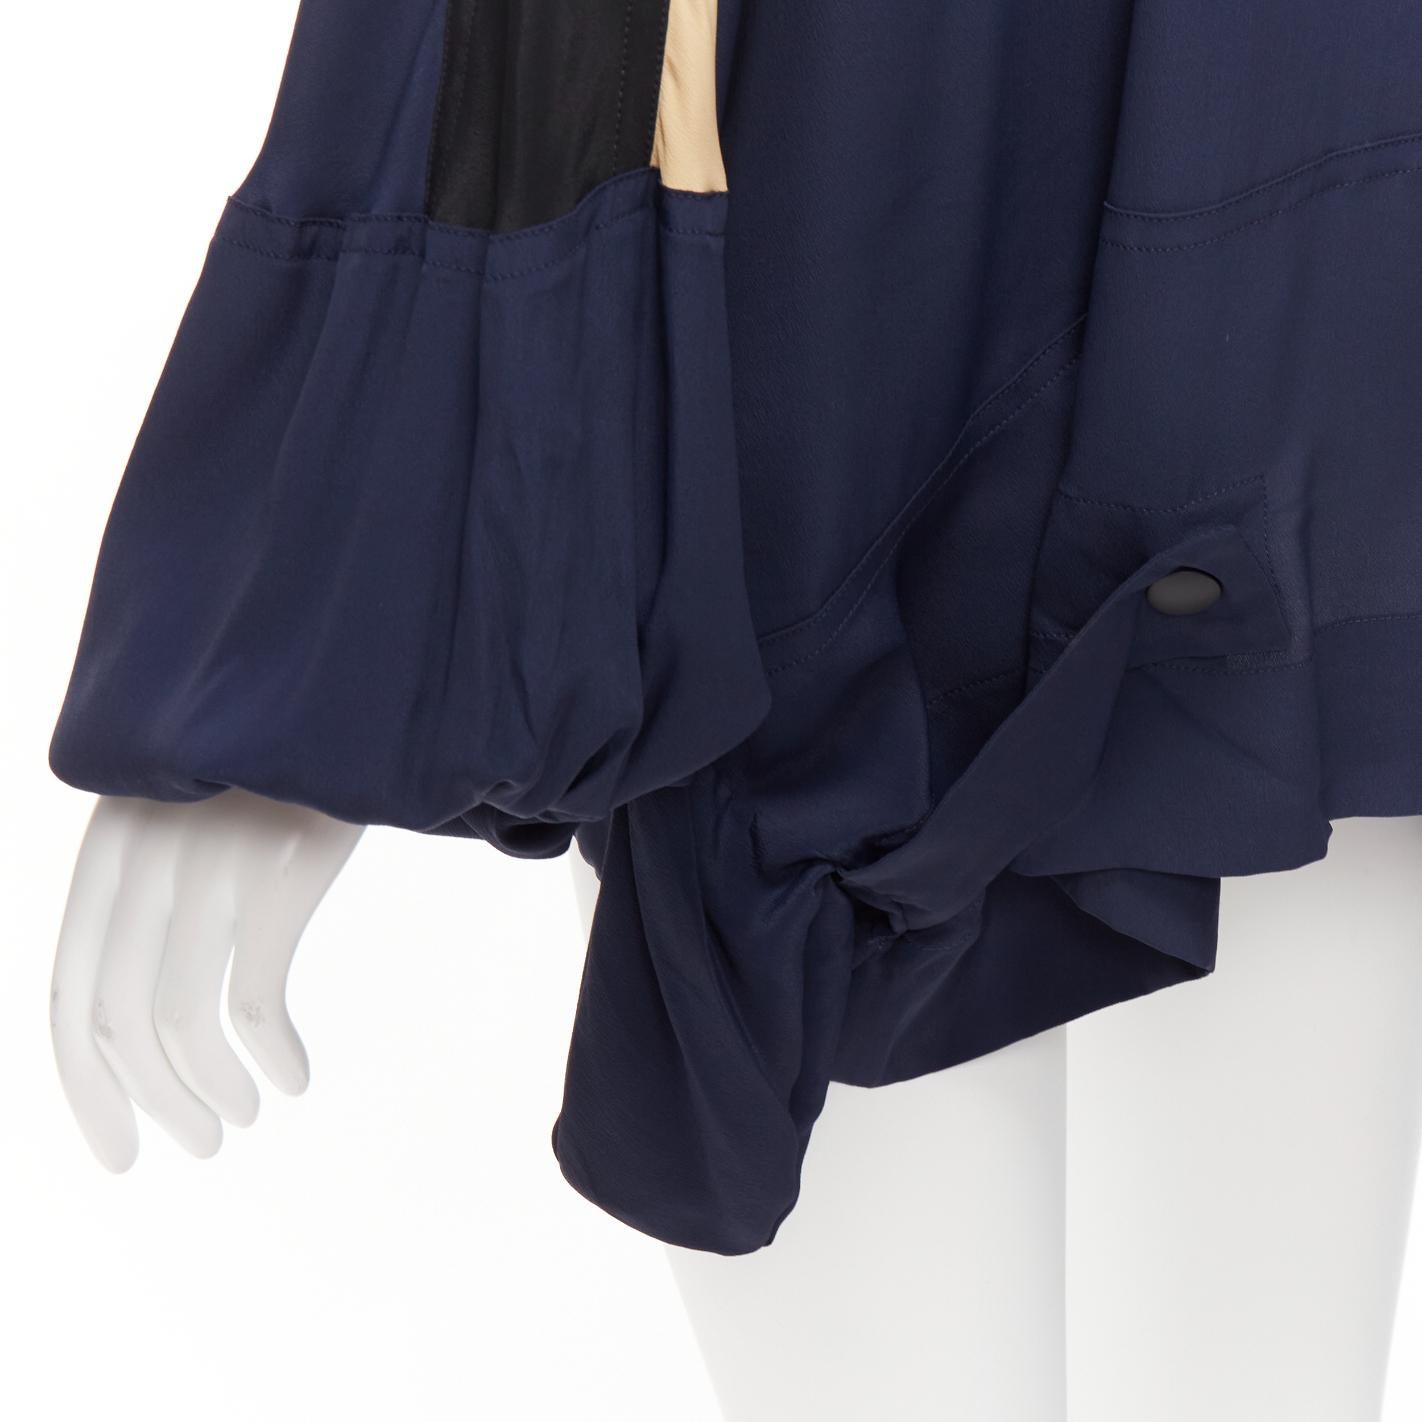 MARNI nude navy black acetate silk colorblock panelled track top IT36 XXS
Reference: CELG/A00423
Brand: Marni
Material: Acetate, Silk
Color: Nude, Navy
Pattern: Solid
Closure: Zip
Extra Details: Half zip front.
Made in: Italy

CONDITION:
Condition: